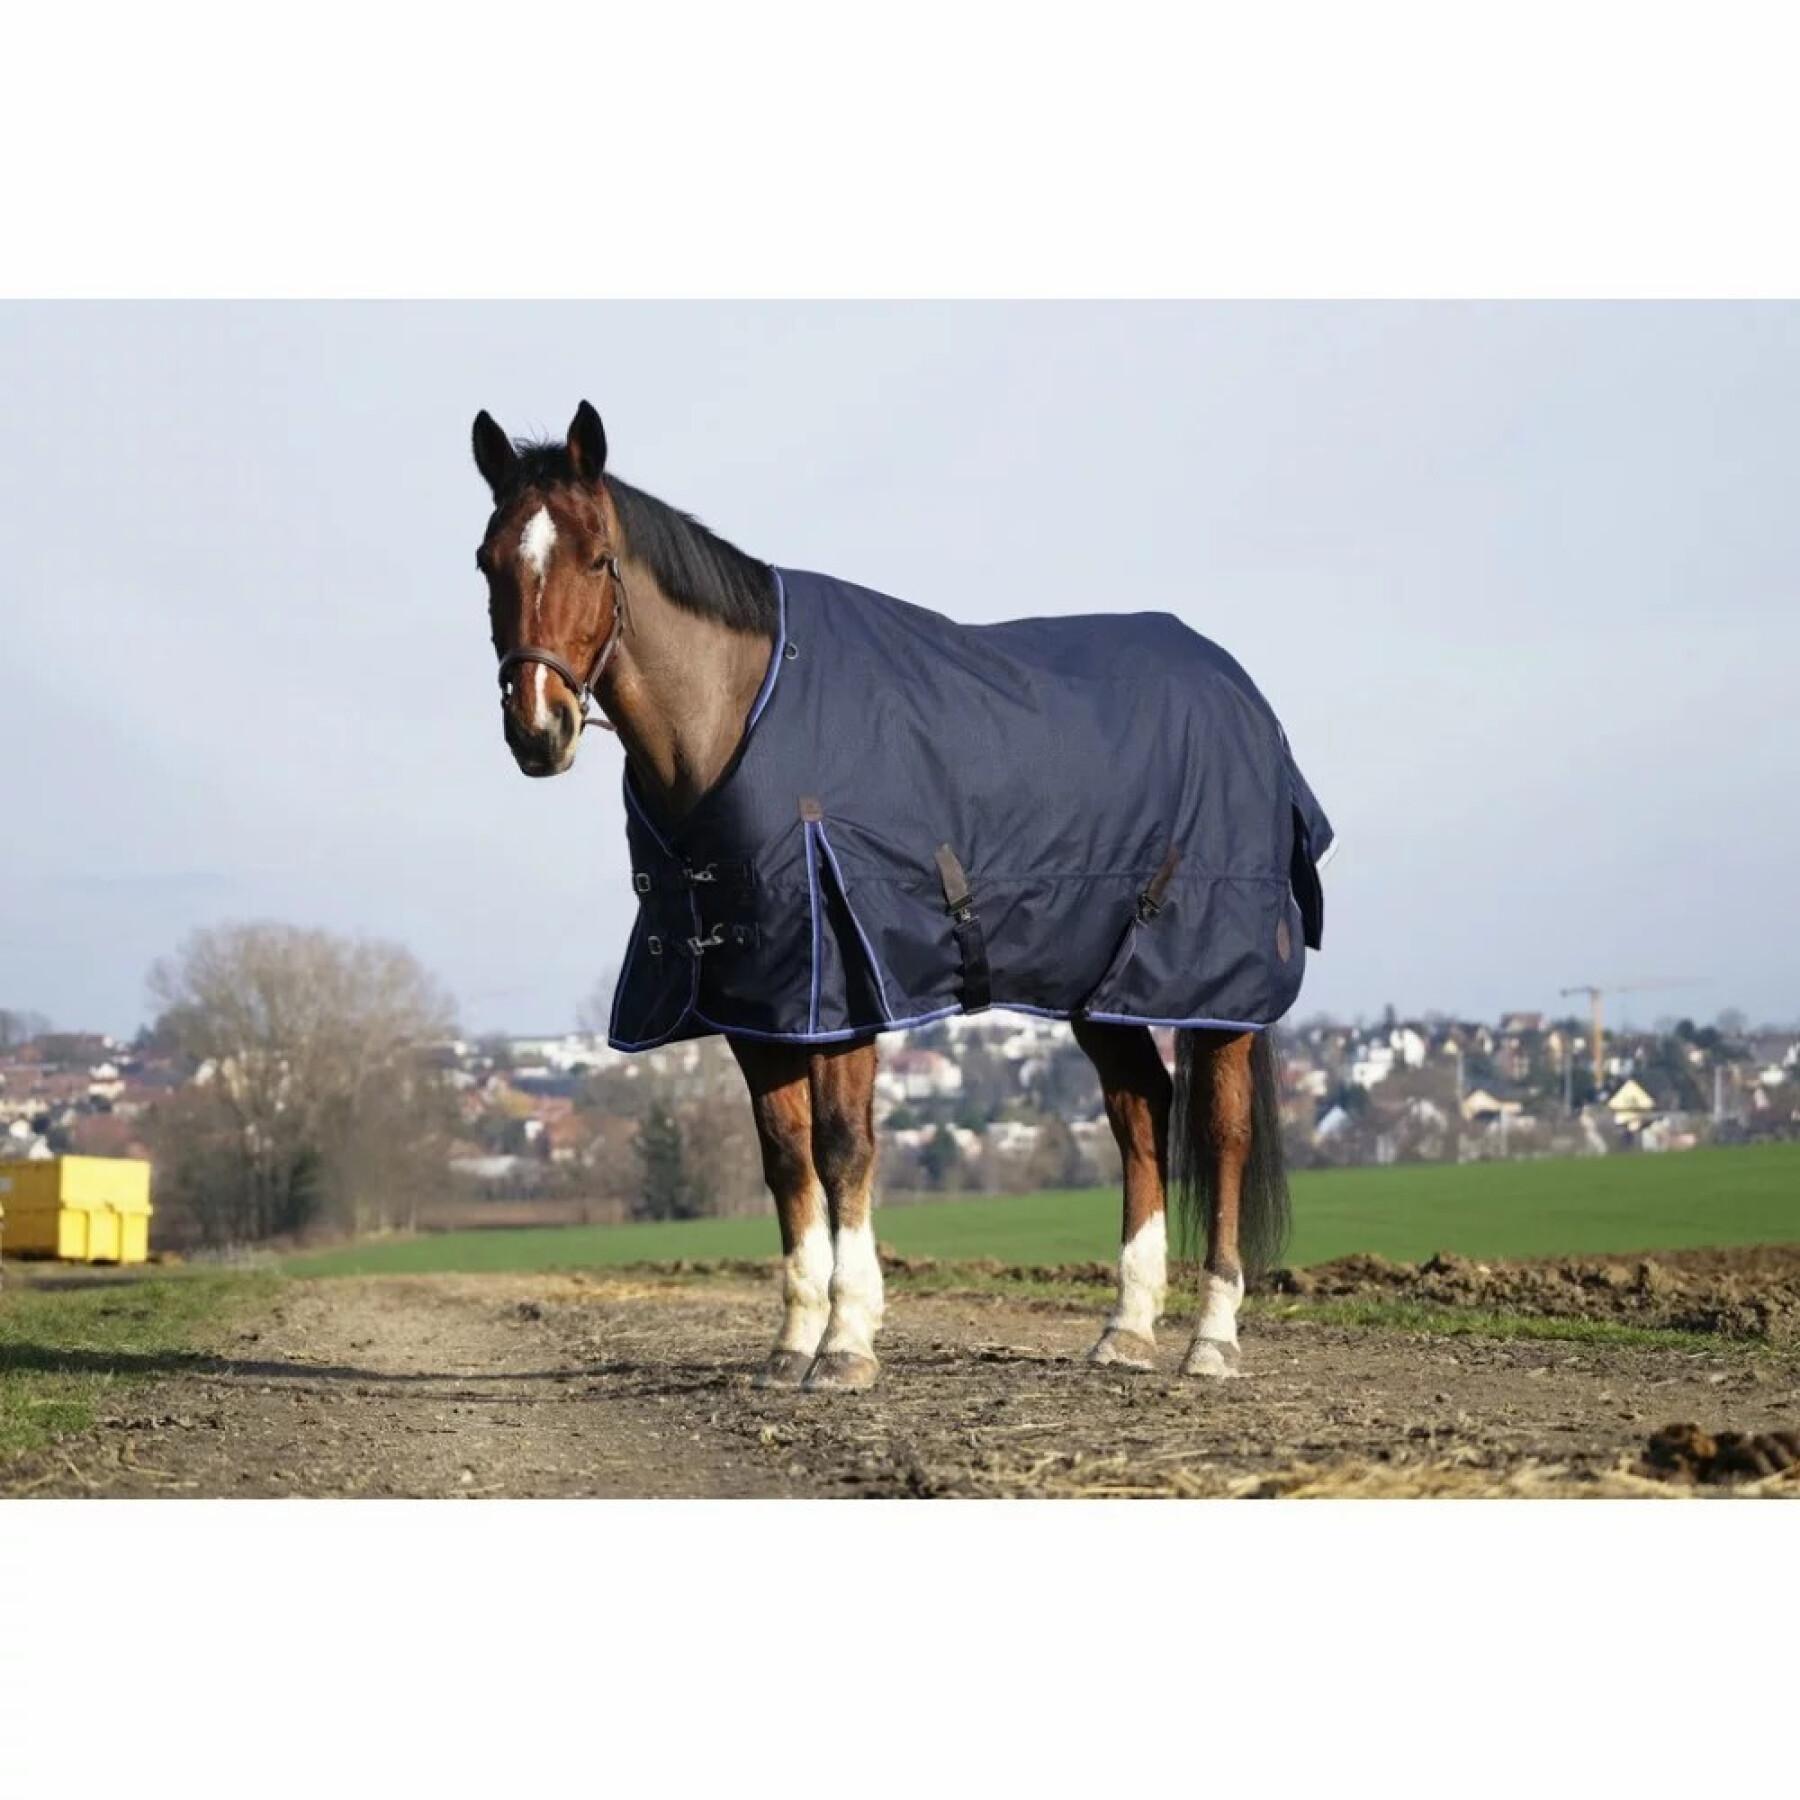 Outdoor horse blanket Equithème Classic 1200D 0 g